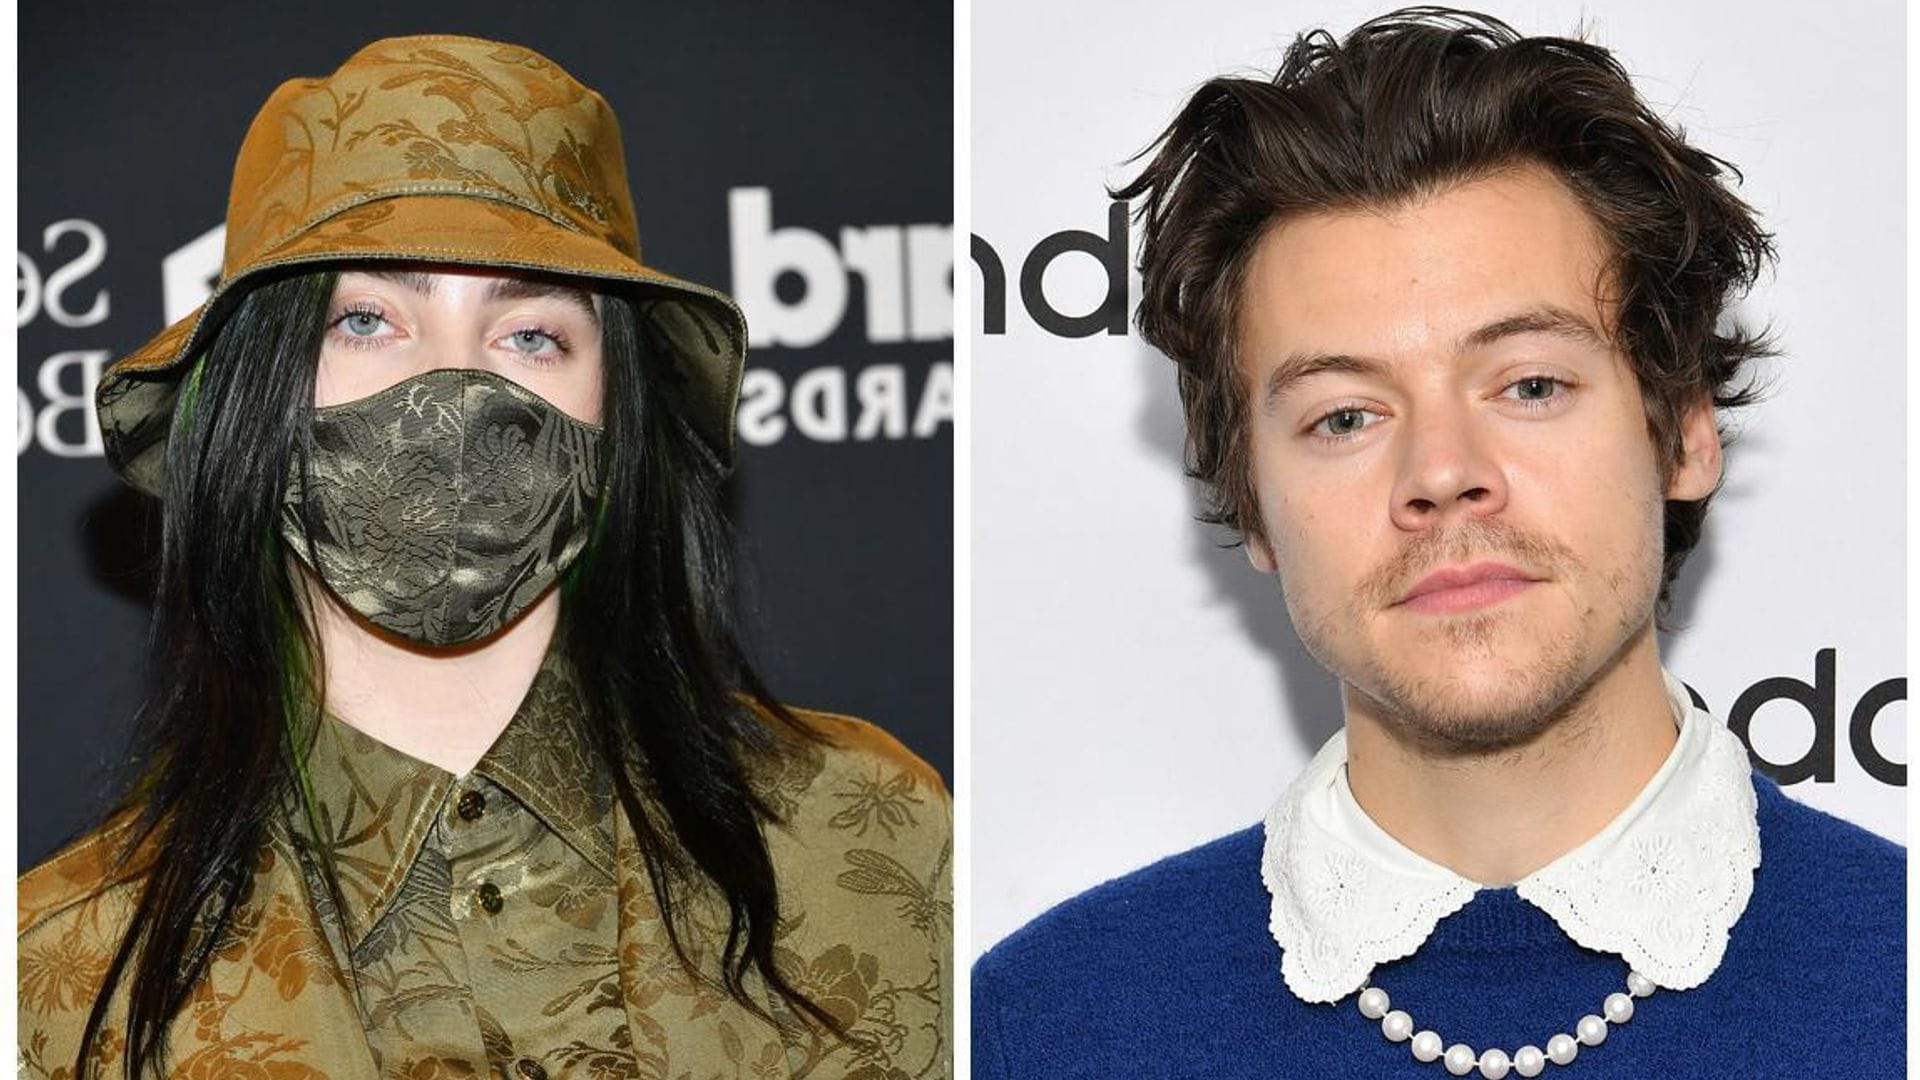 Billie Eilish and Harry Styles would star in Gucci’s new virtual fashion show